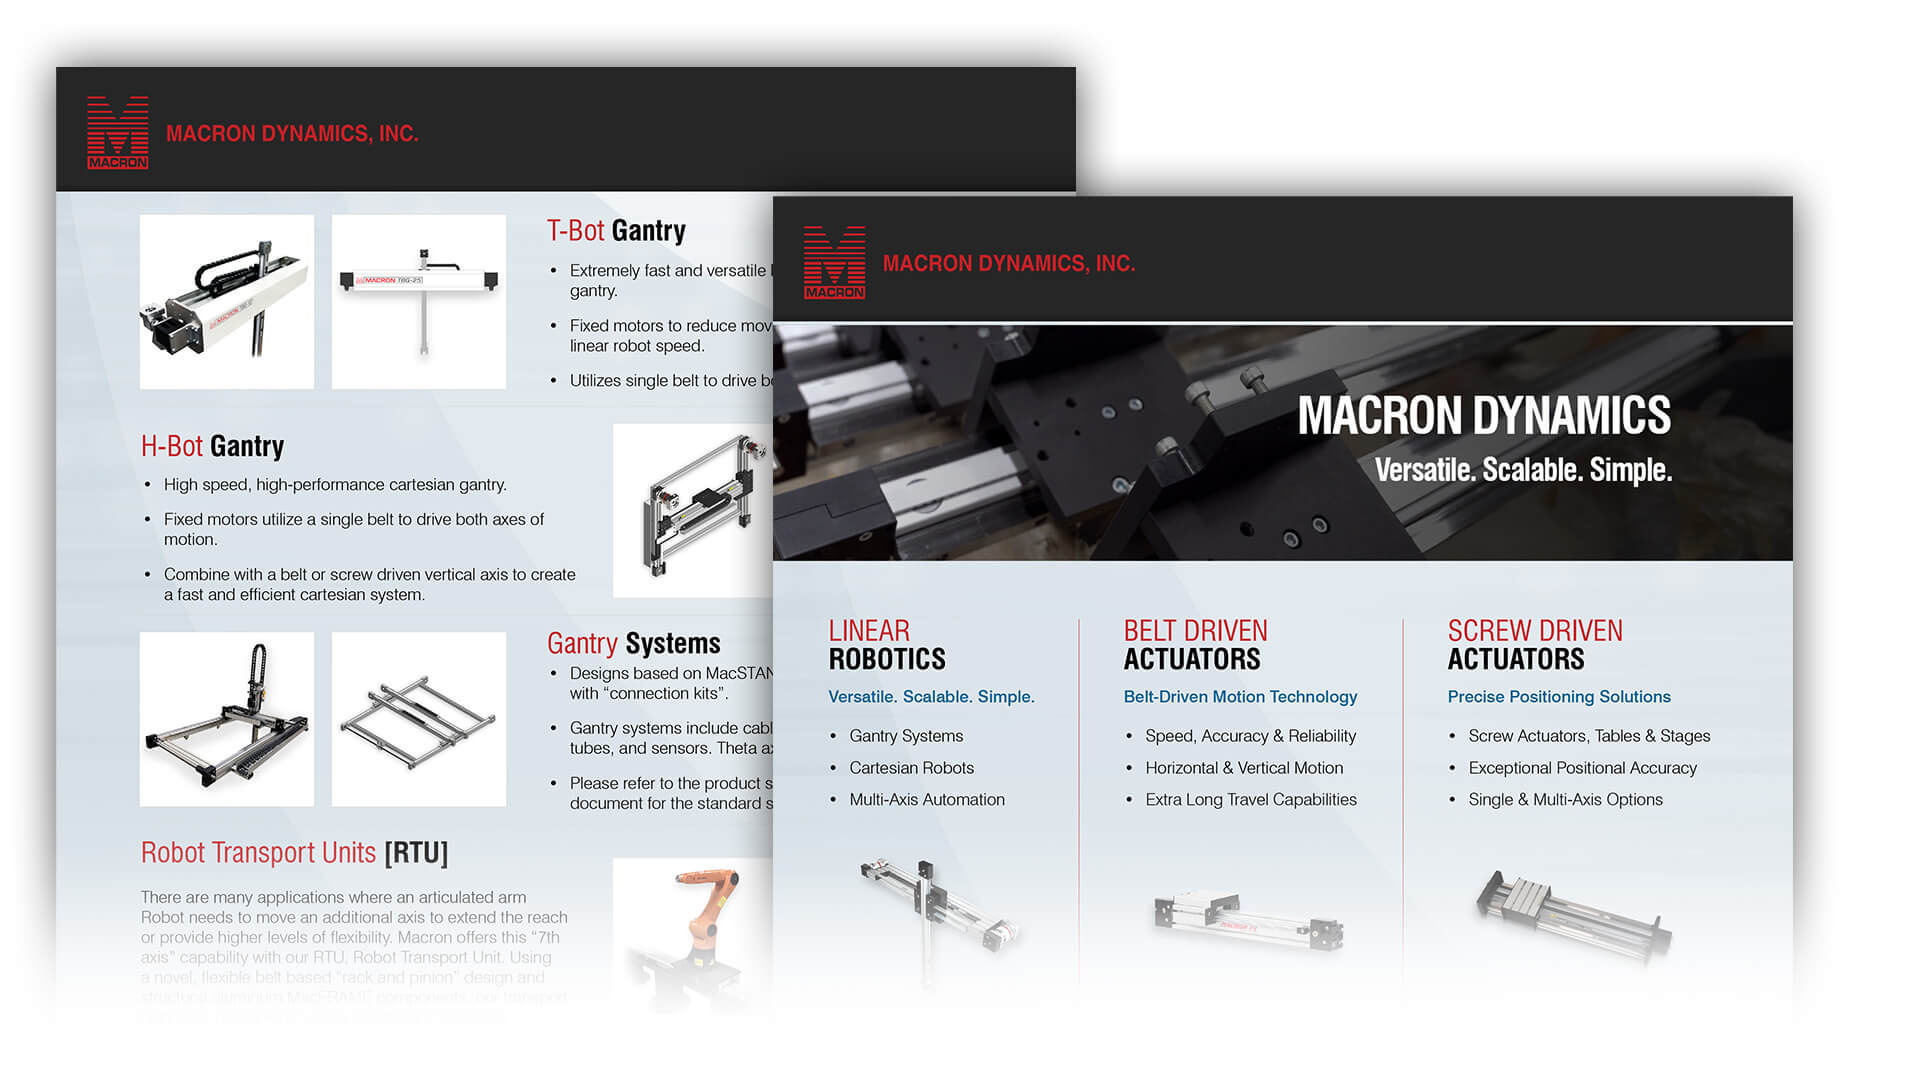 Download the Macron Dynamics Product Brochure